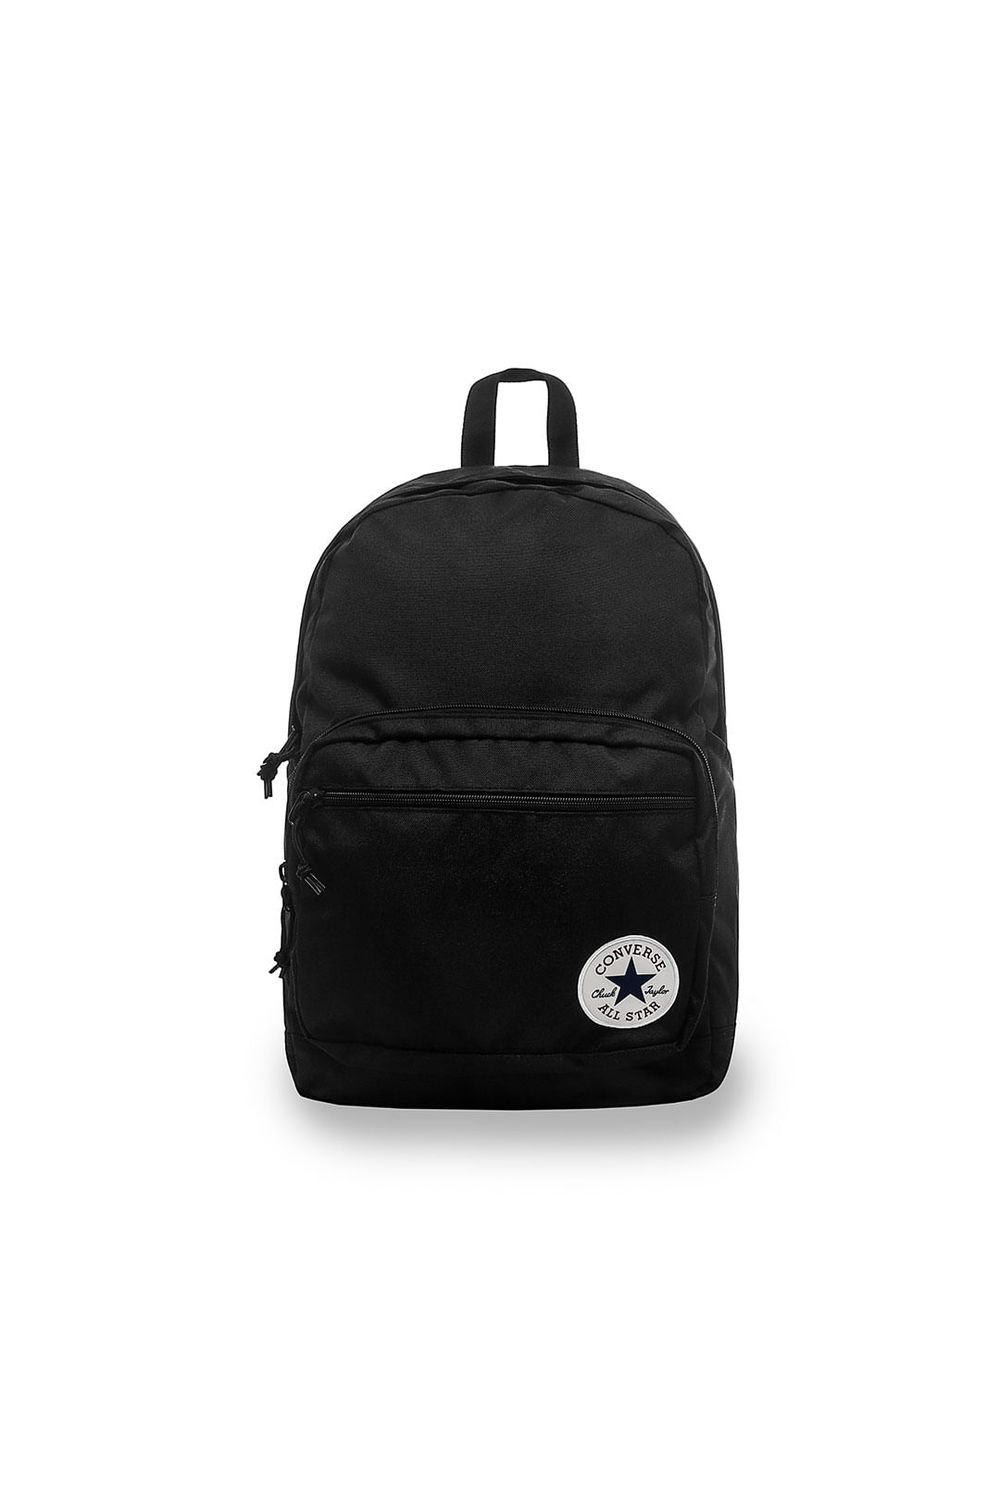 CONVERSE MORRAL UNISEX GO 2 BACKPACK